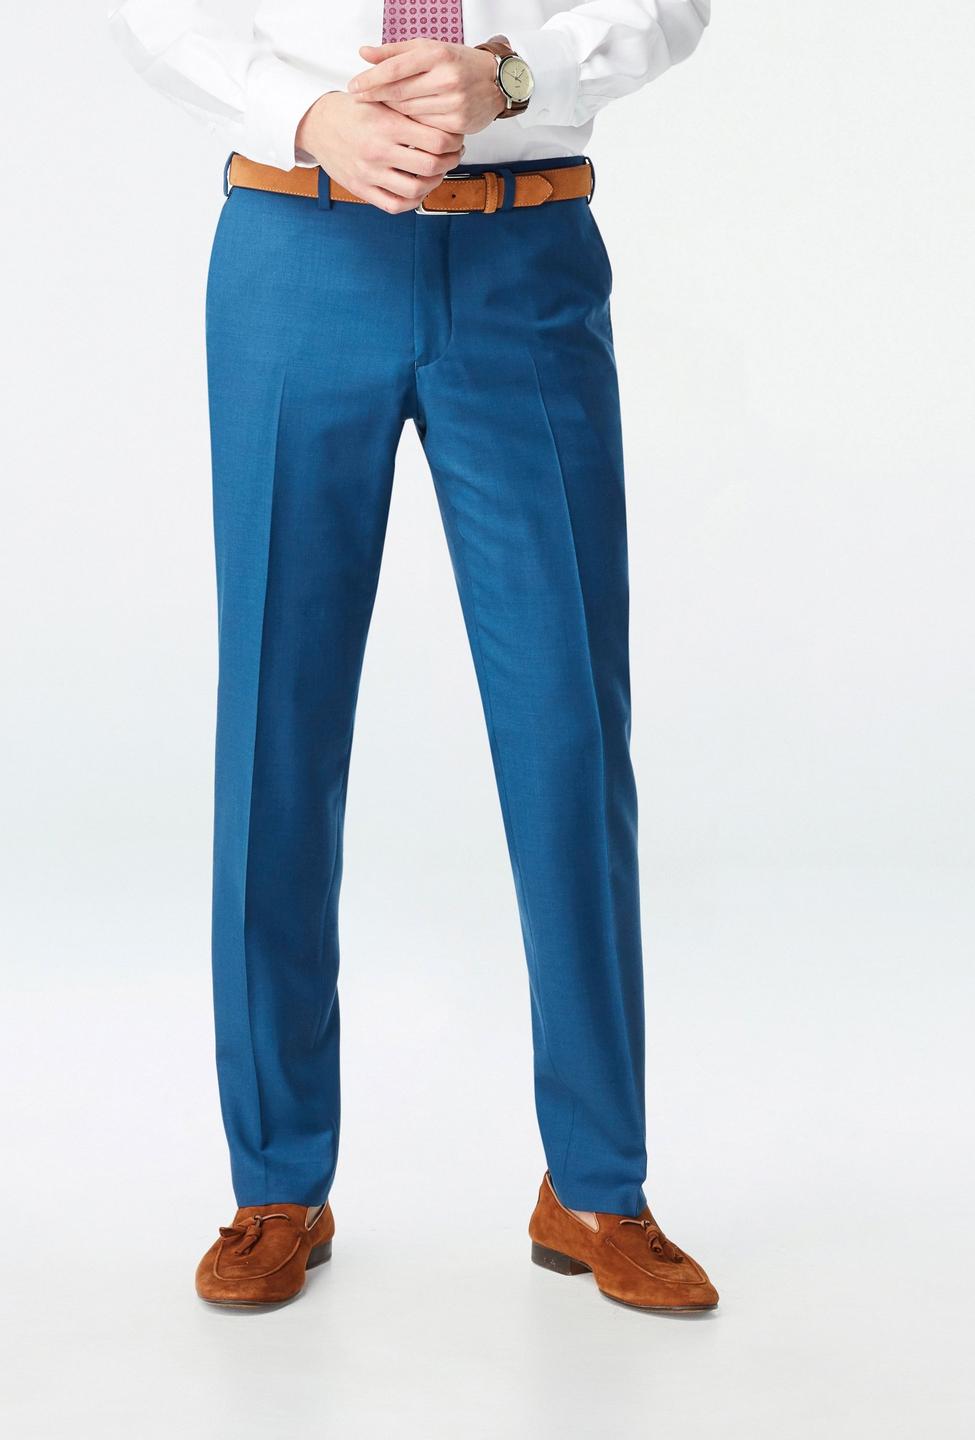 Teal pants - Hemsworth Solid Design from Premium Indochino Collection